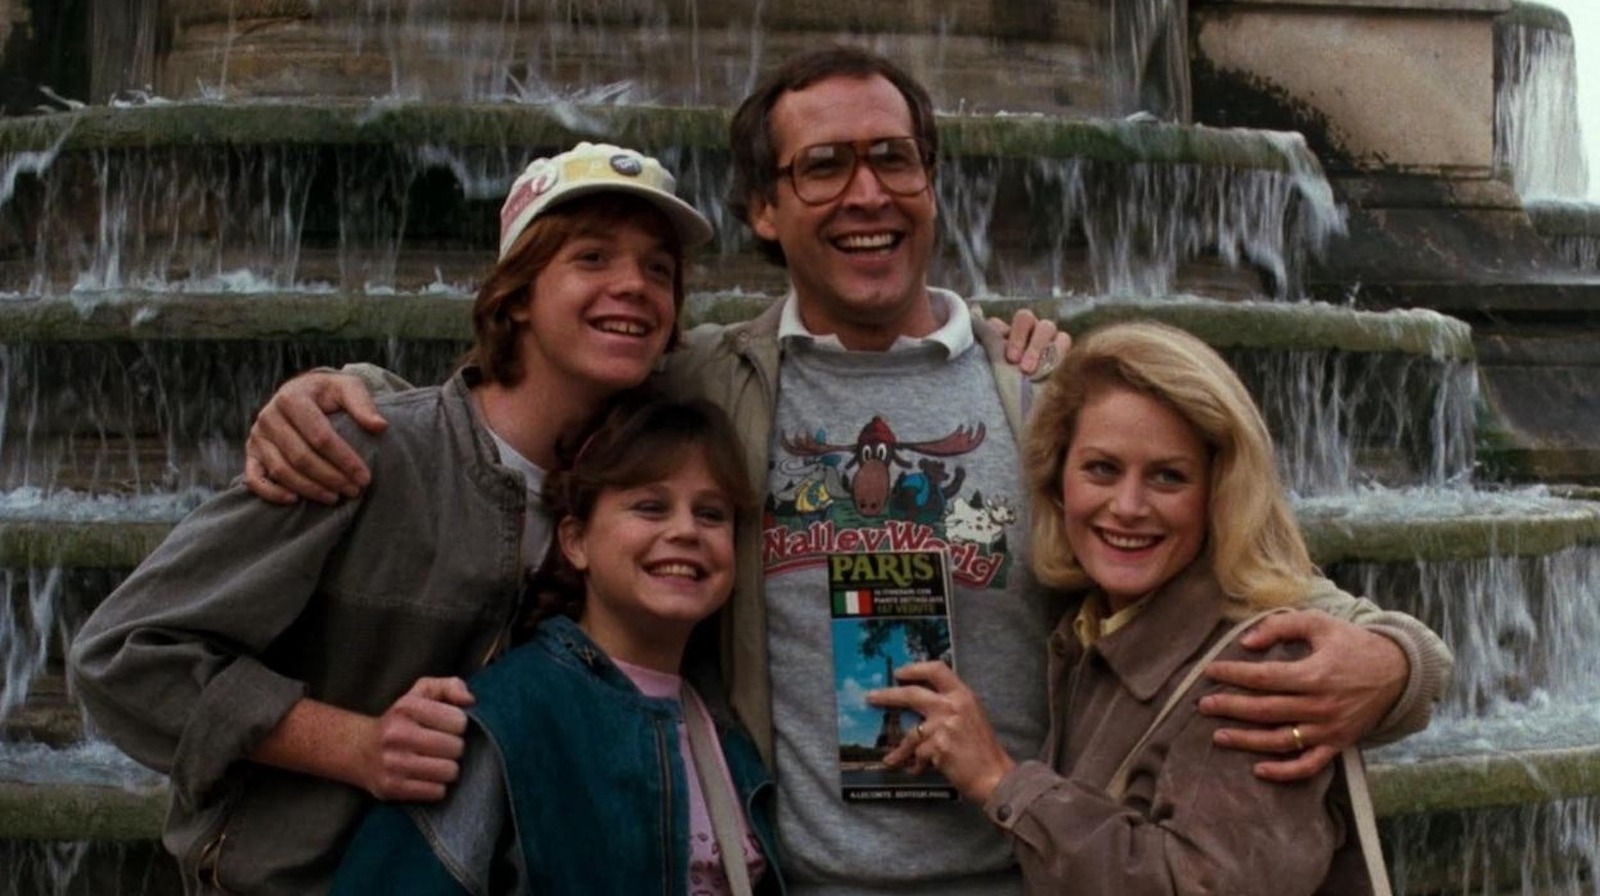 #Why Amy Heckerling Hated Working On National Lampoon’s European Vacation